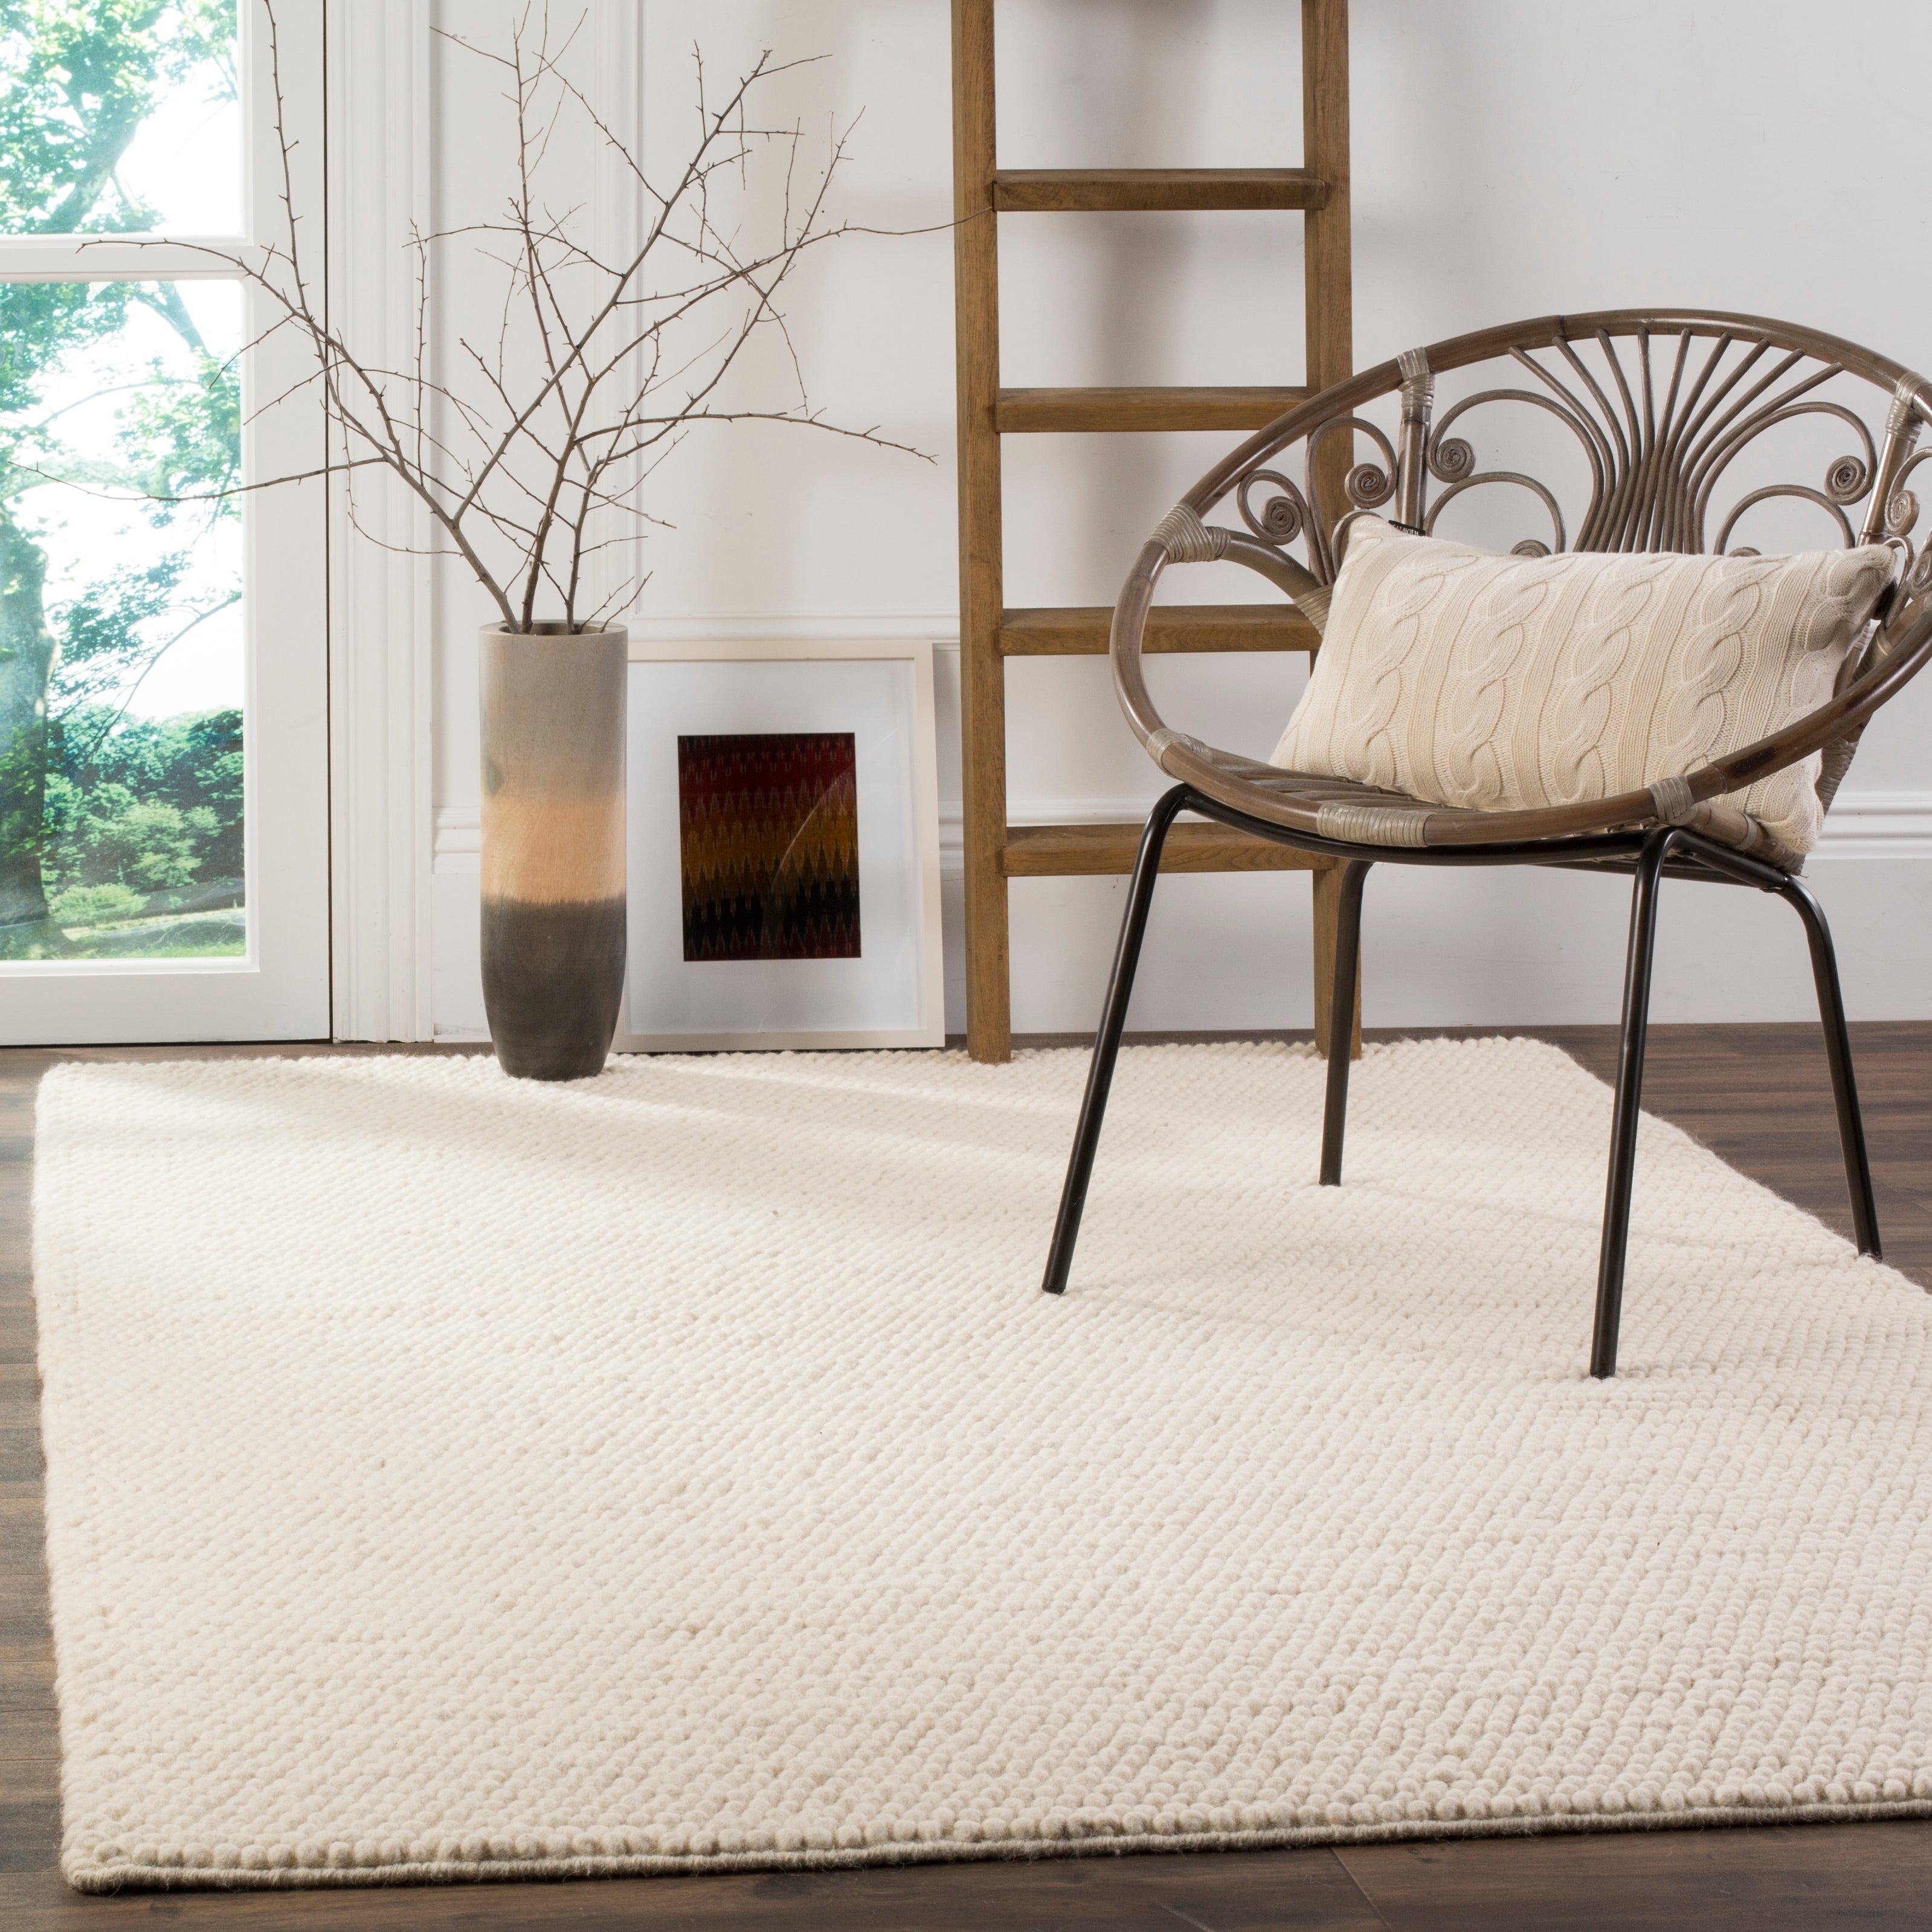 Buy Safavieh Rugs in Canada at Discounted Prices | The Rug District